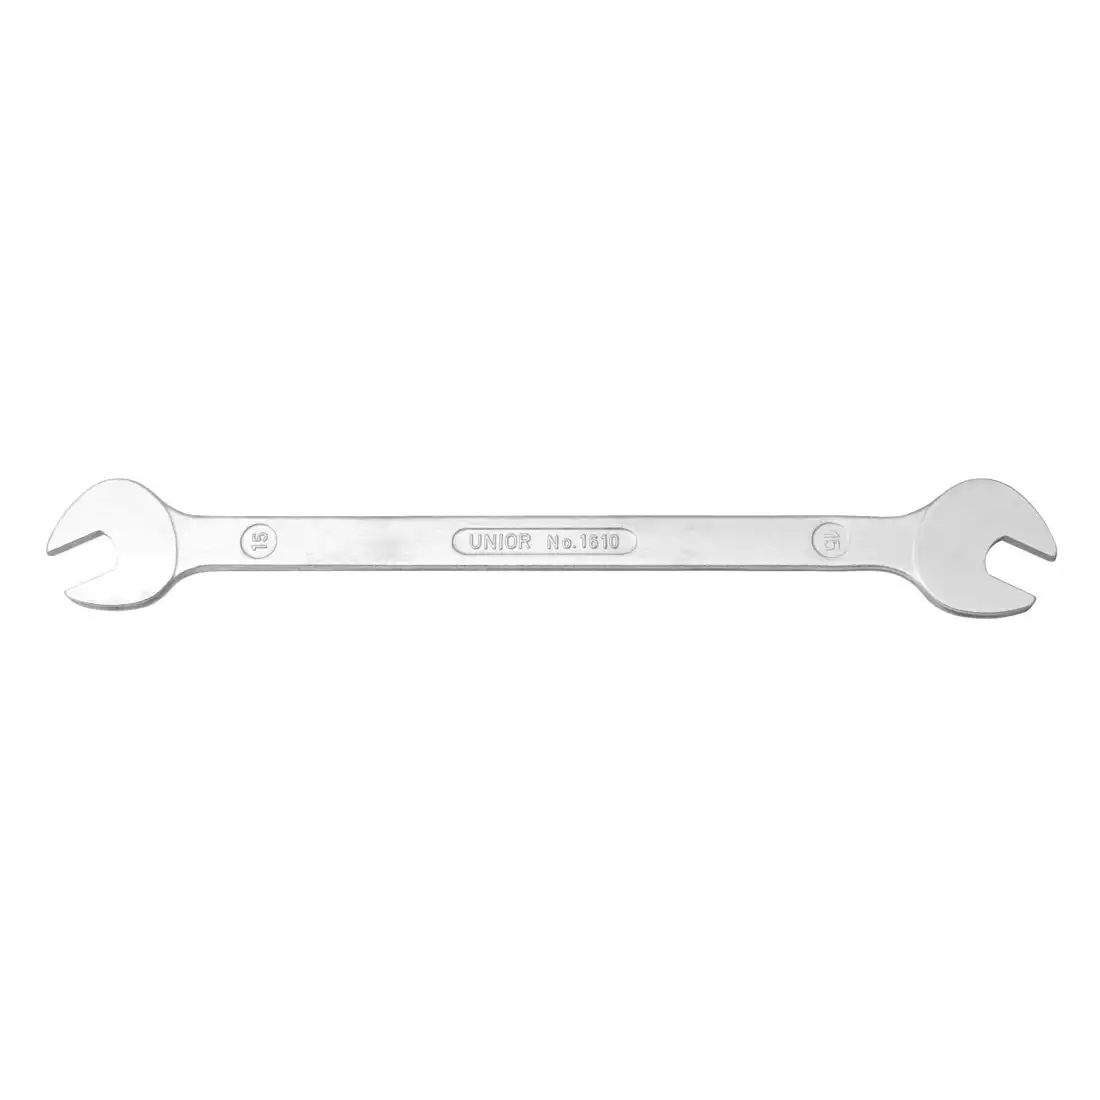 UNIOR professional pedal wrench 15x15 